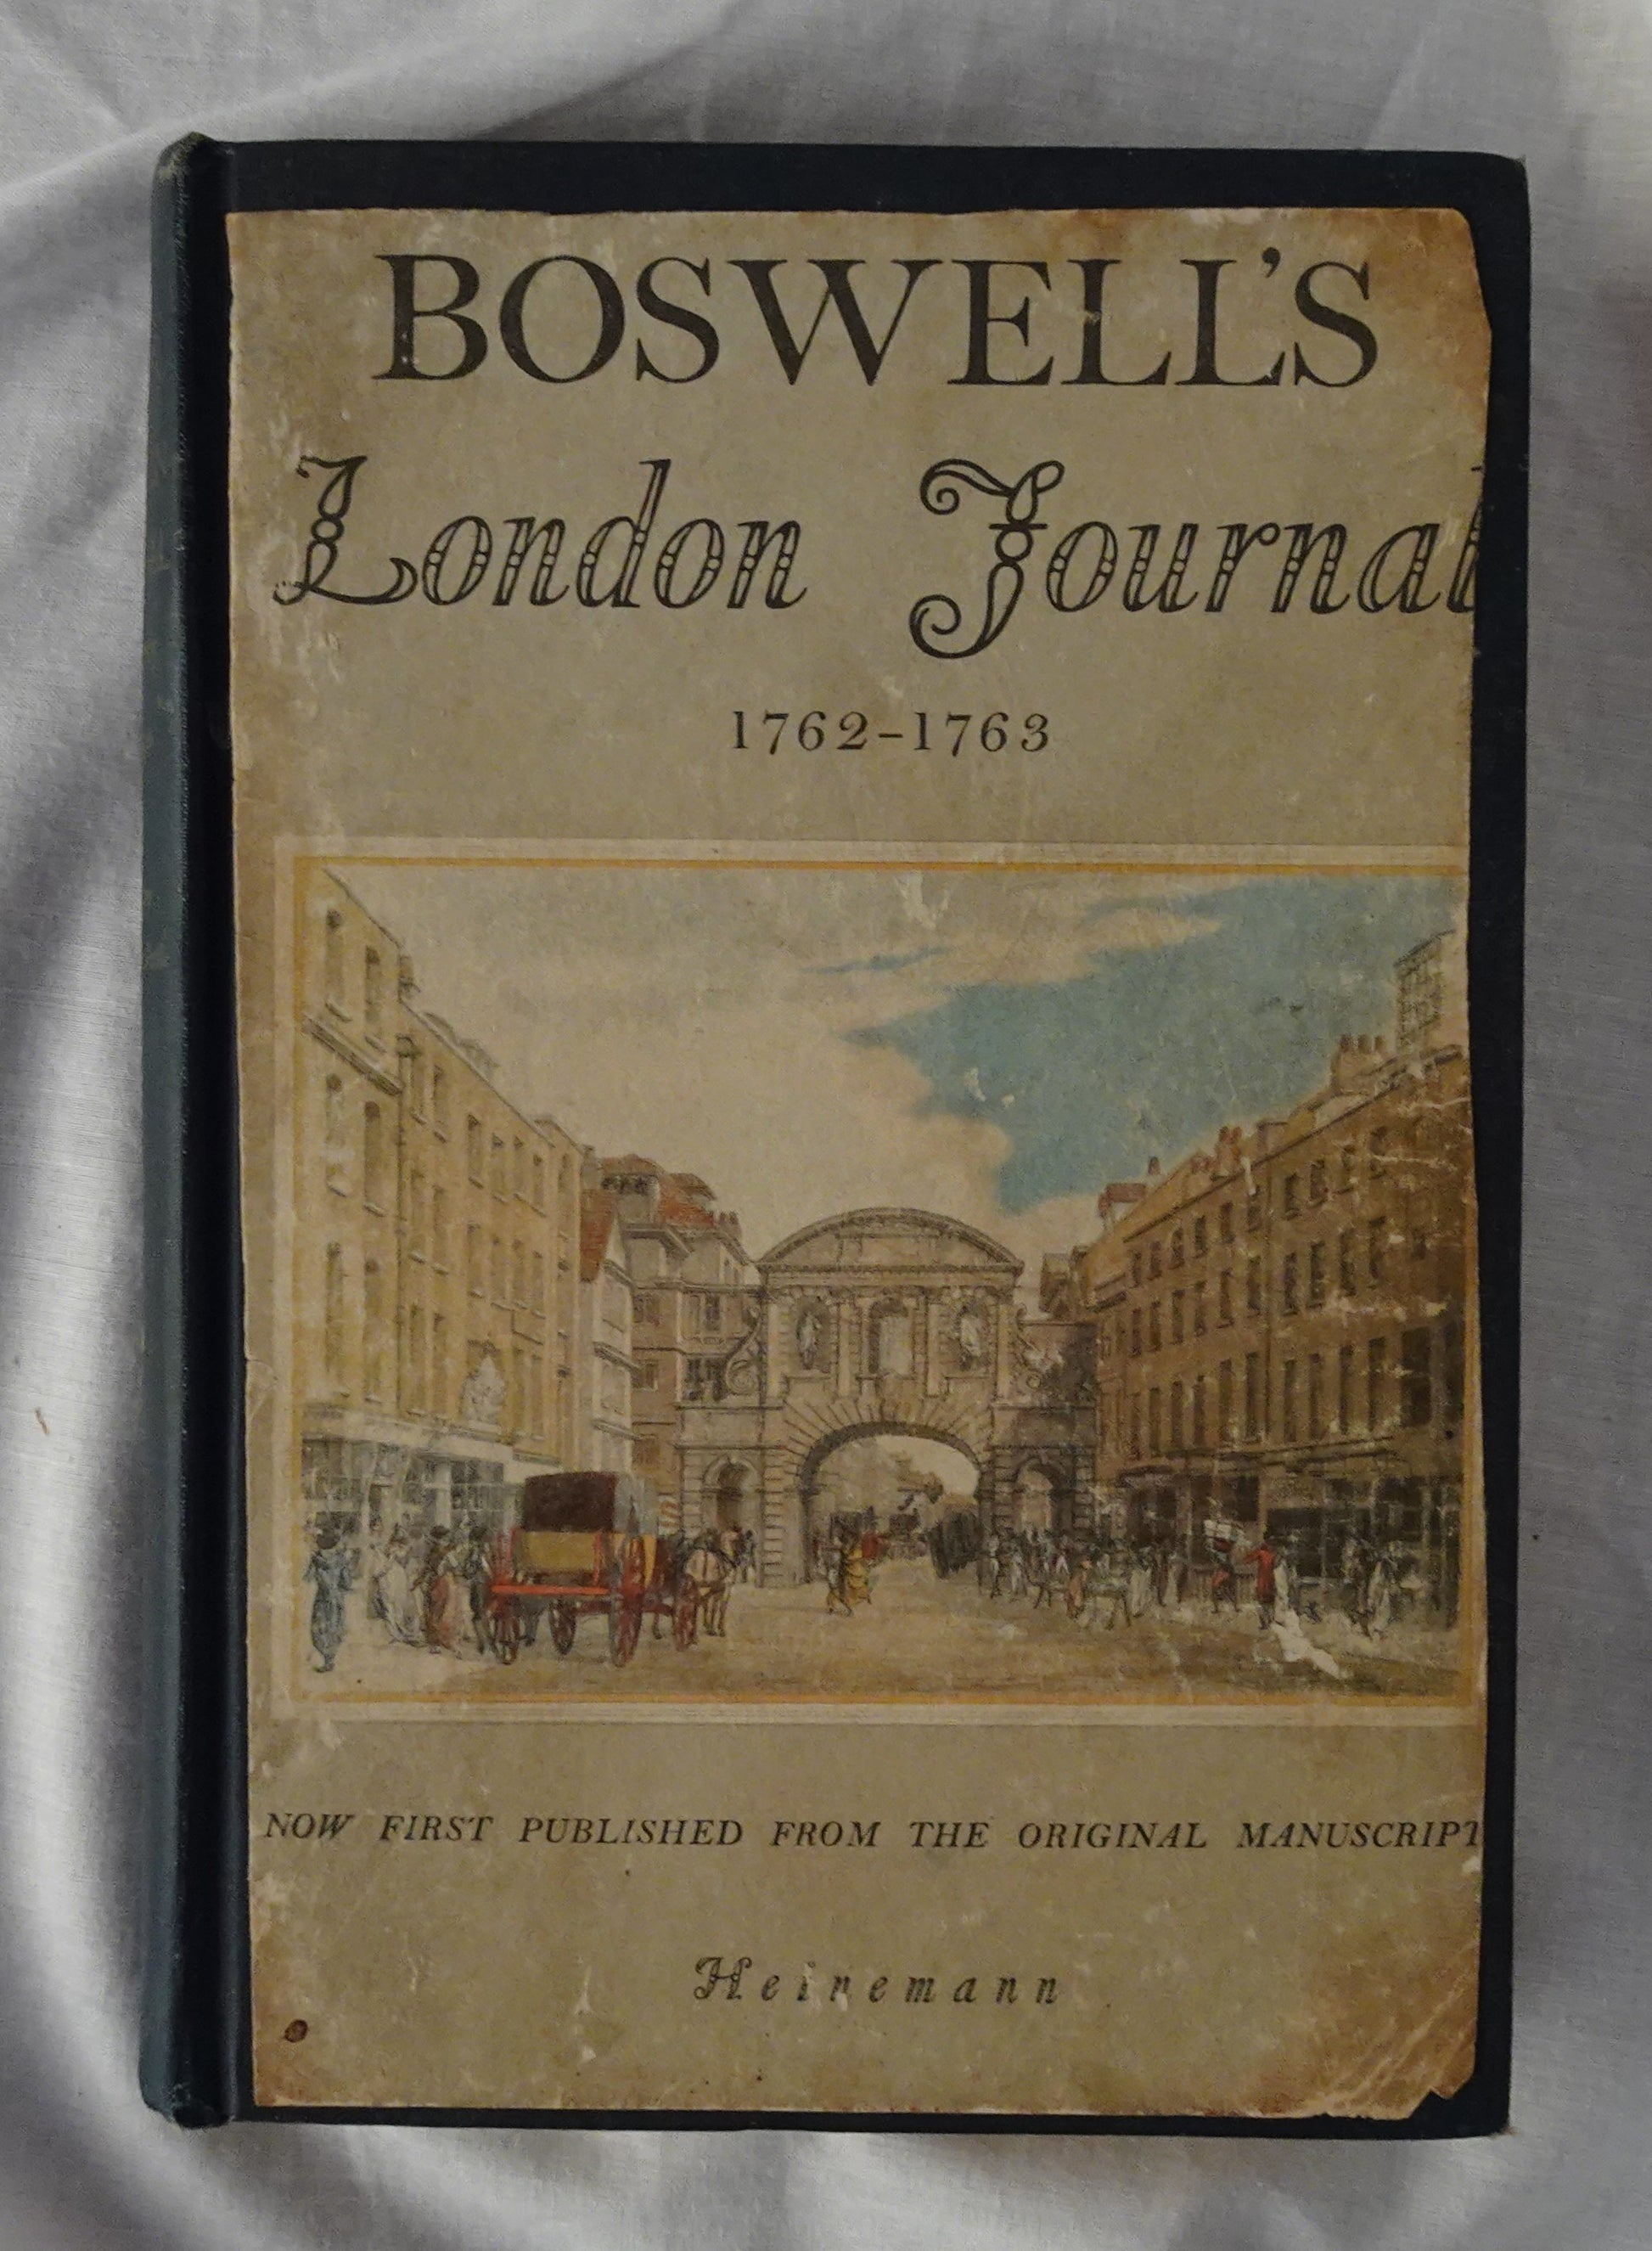 Boswell’s London Journal  1762-1763  Prepared by Frederick A. Pottle